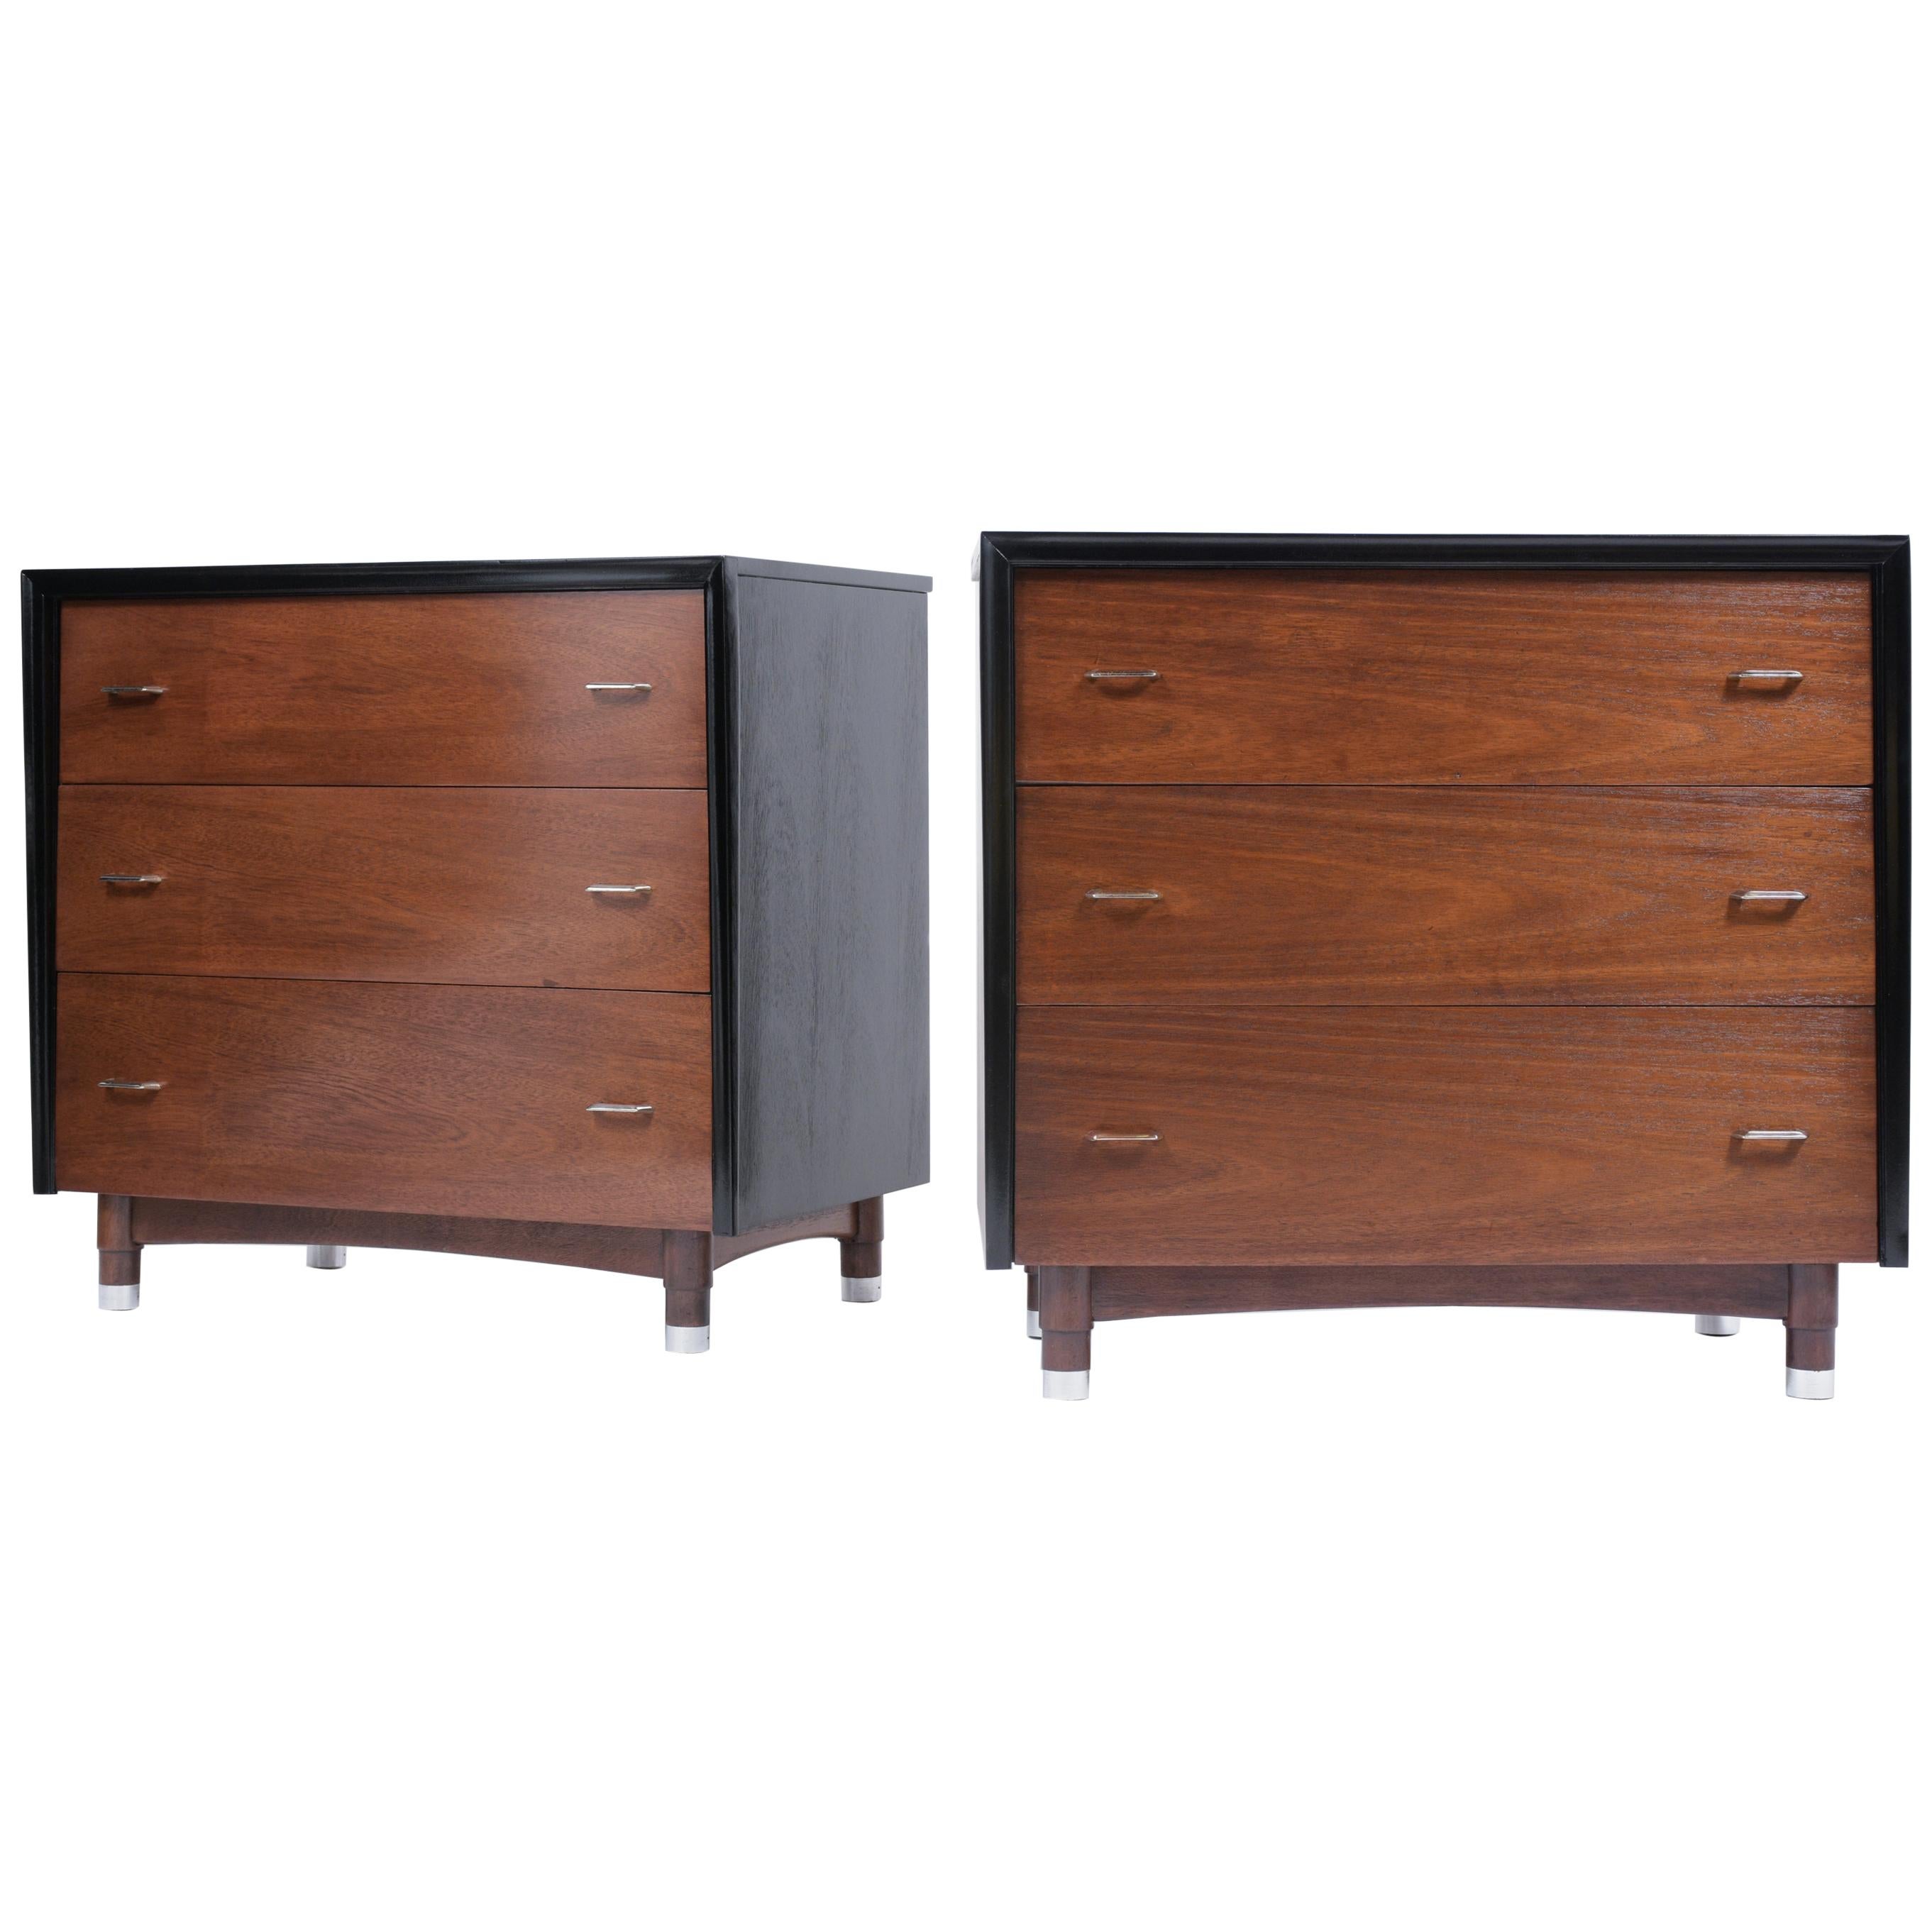 1960s Mahogany Dressers Pair - Mid-Century Modern with Chrome Accents